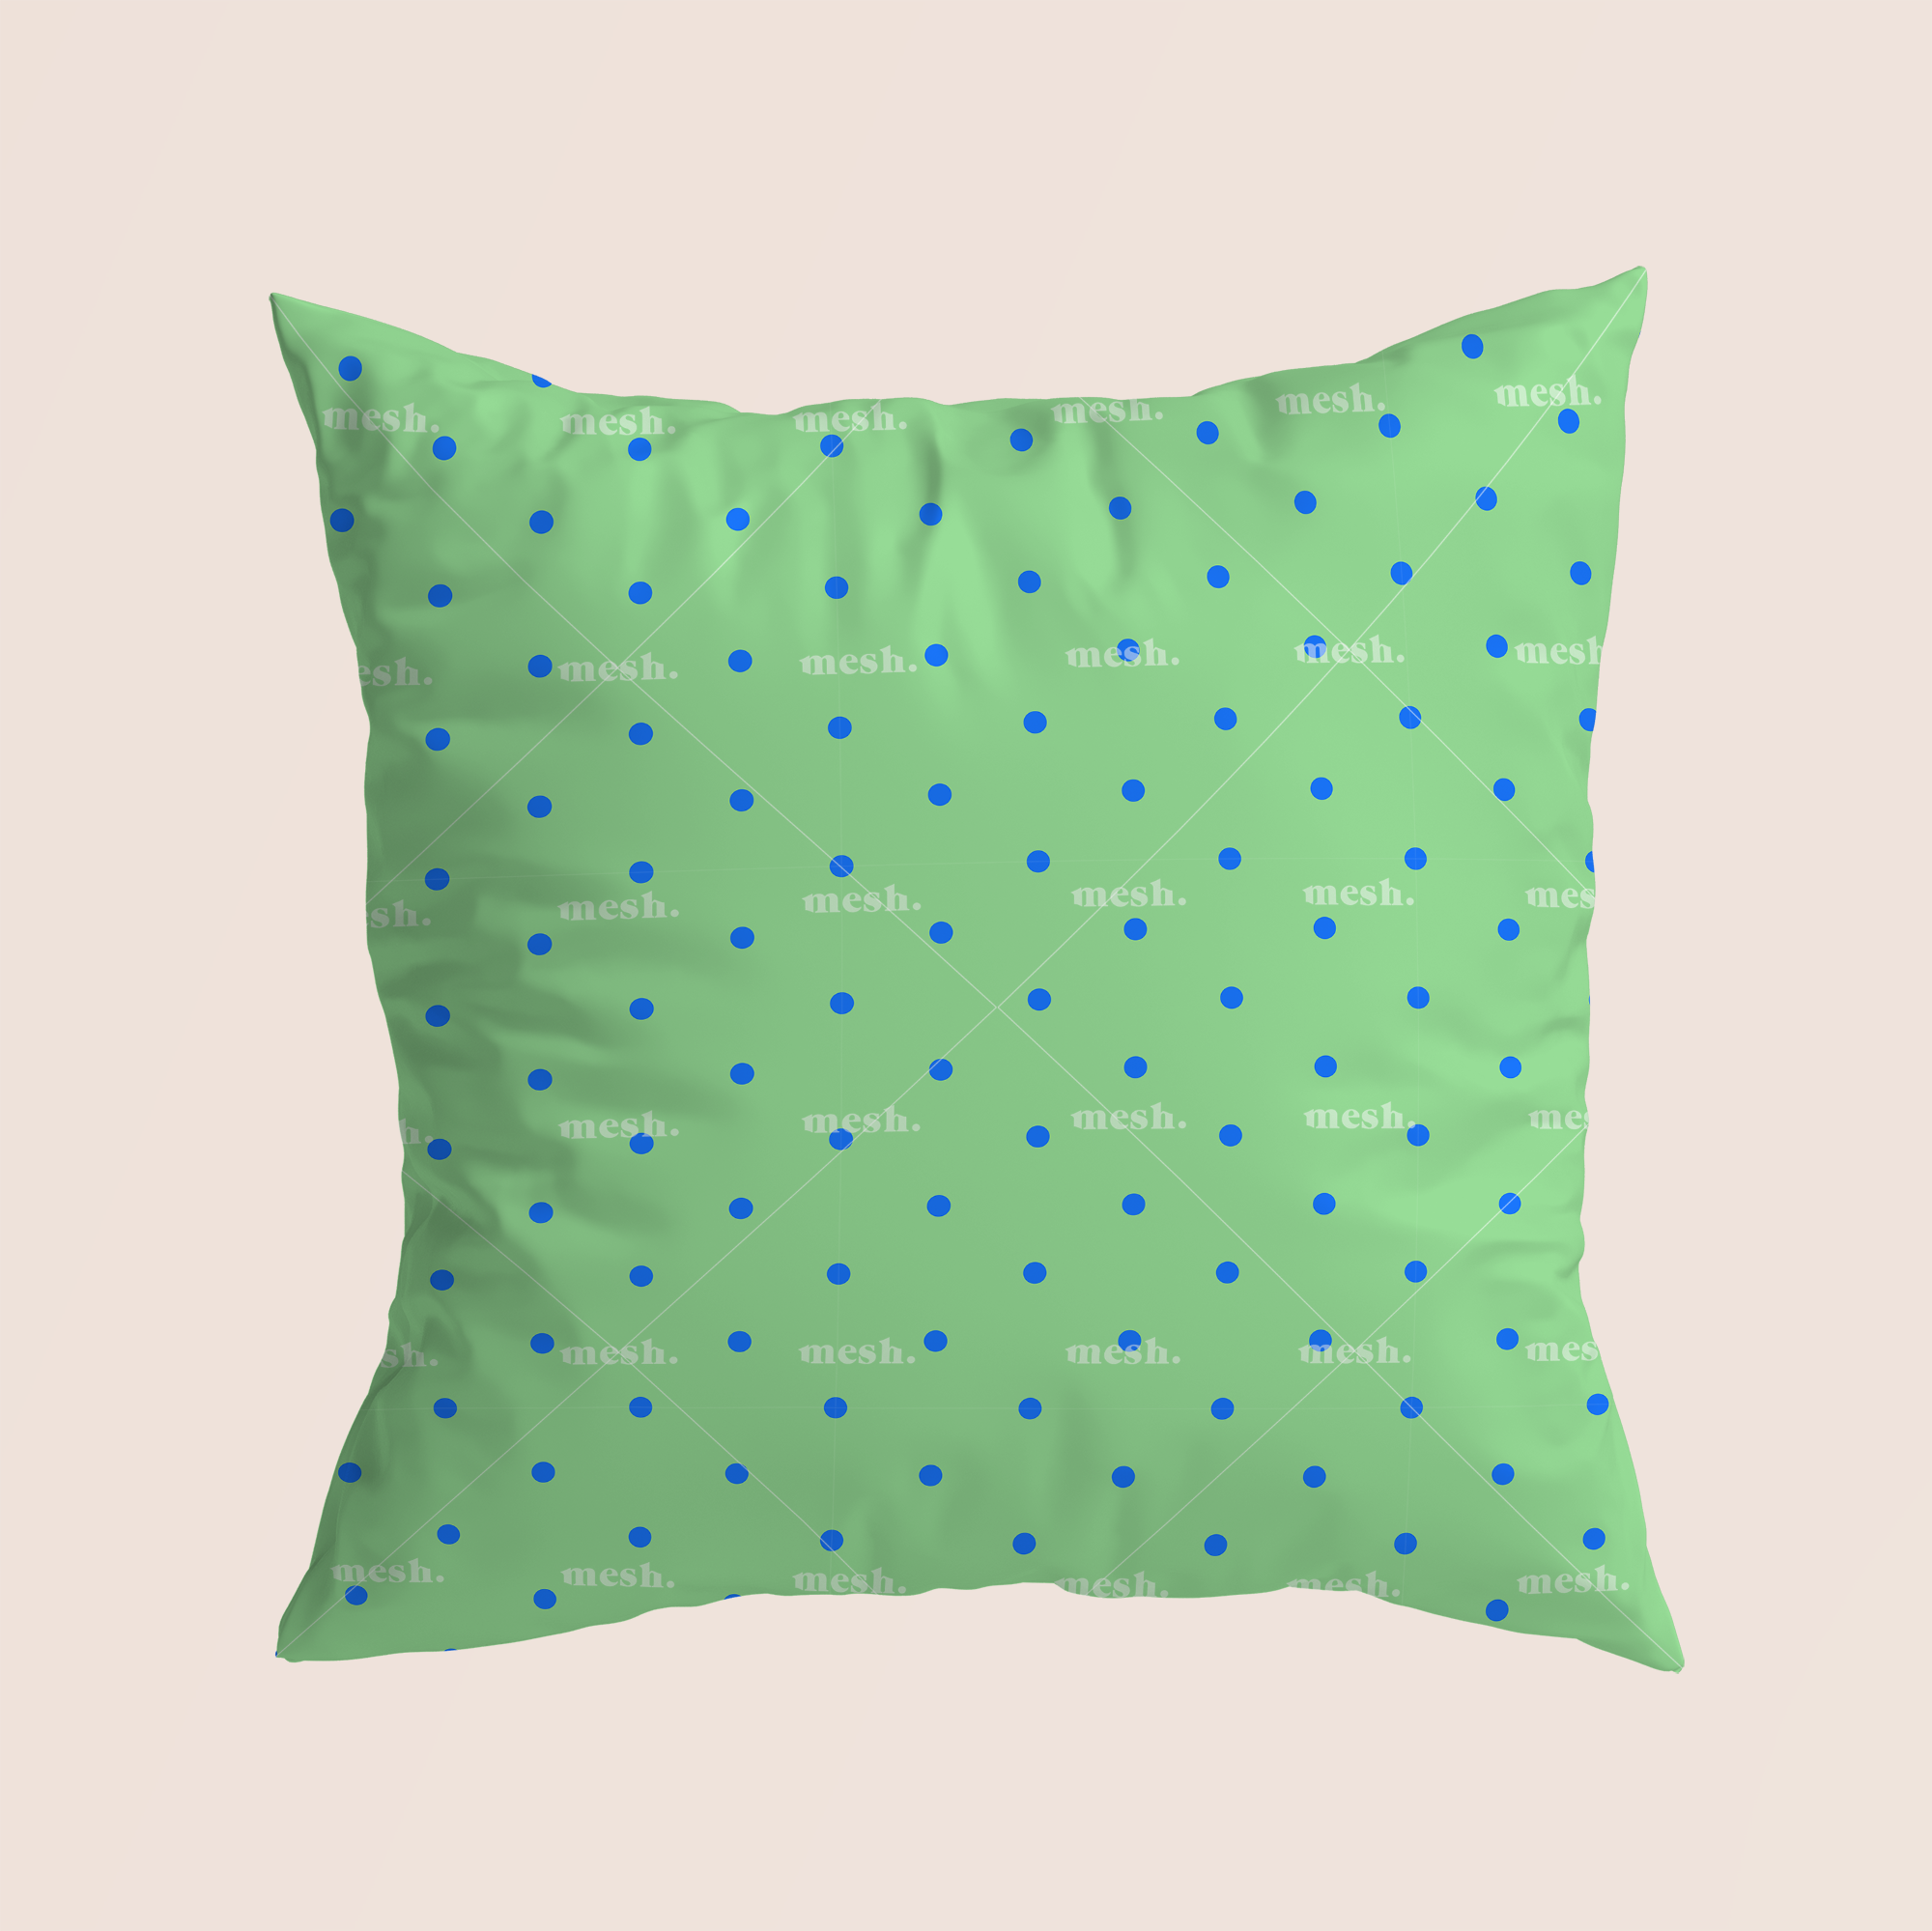 Trivial dots trendy in green pattern design printed on recycled fabric pillow